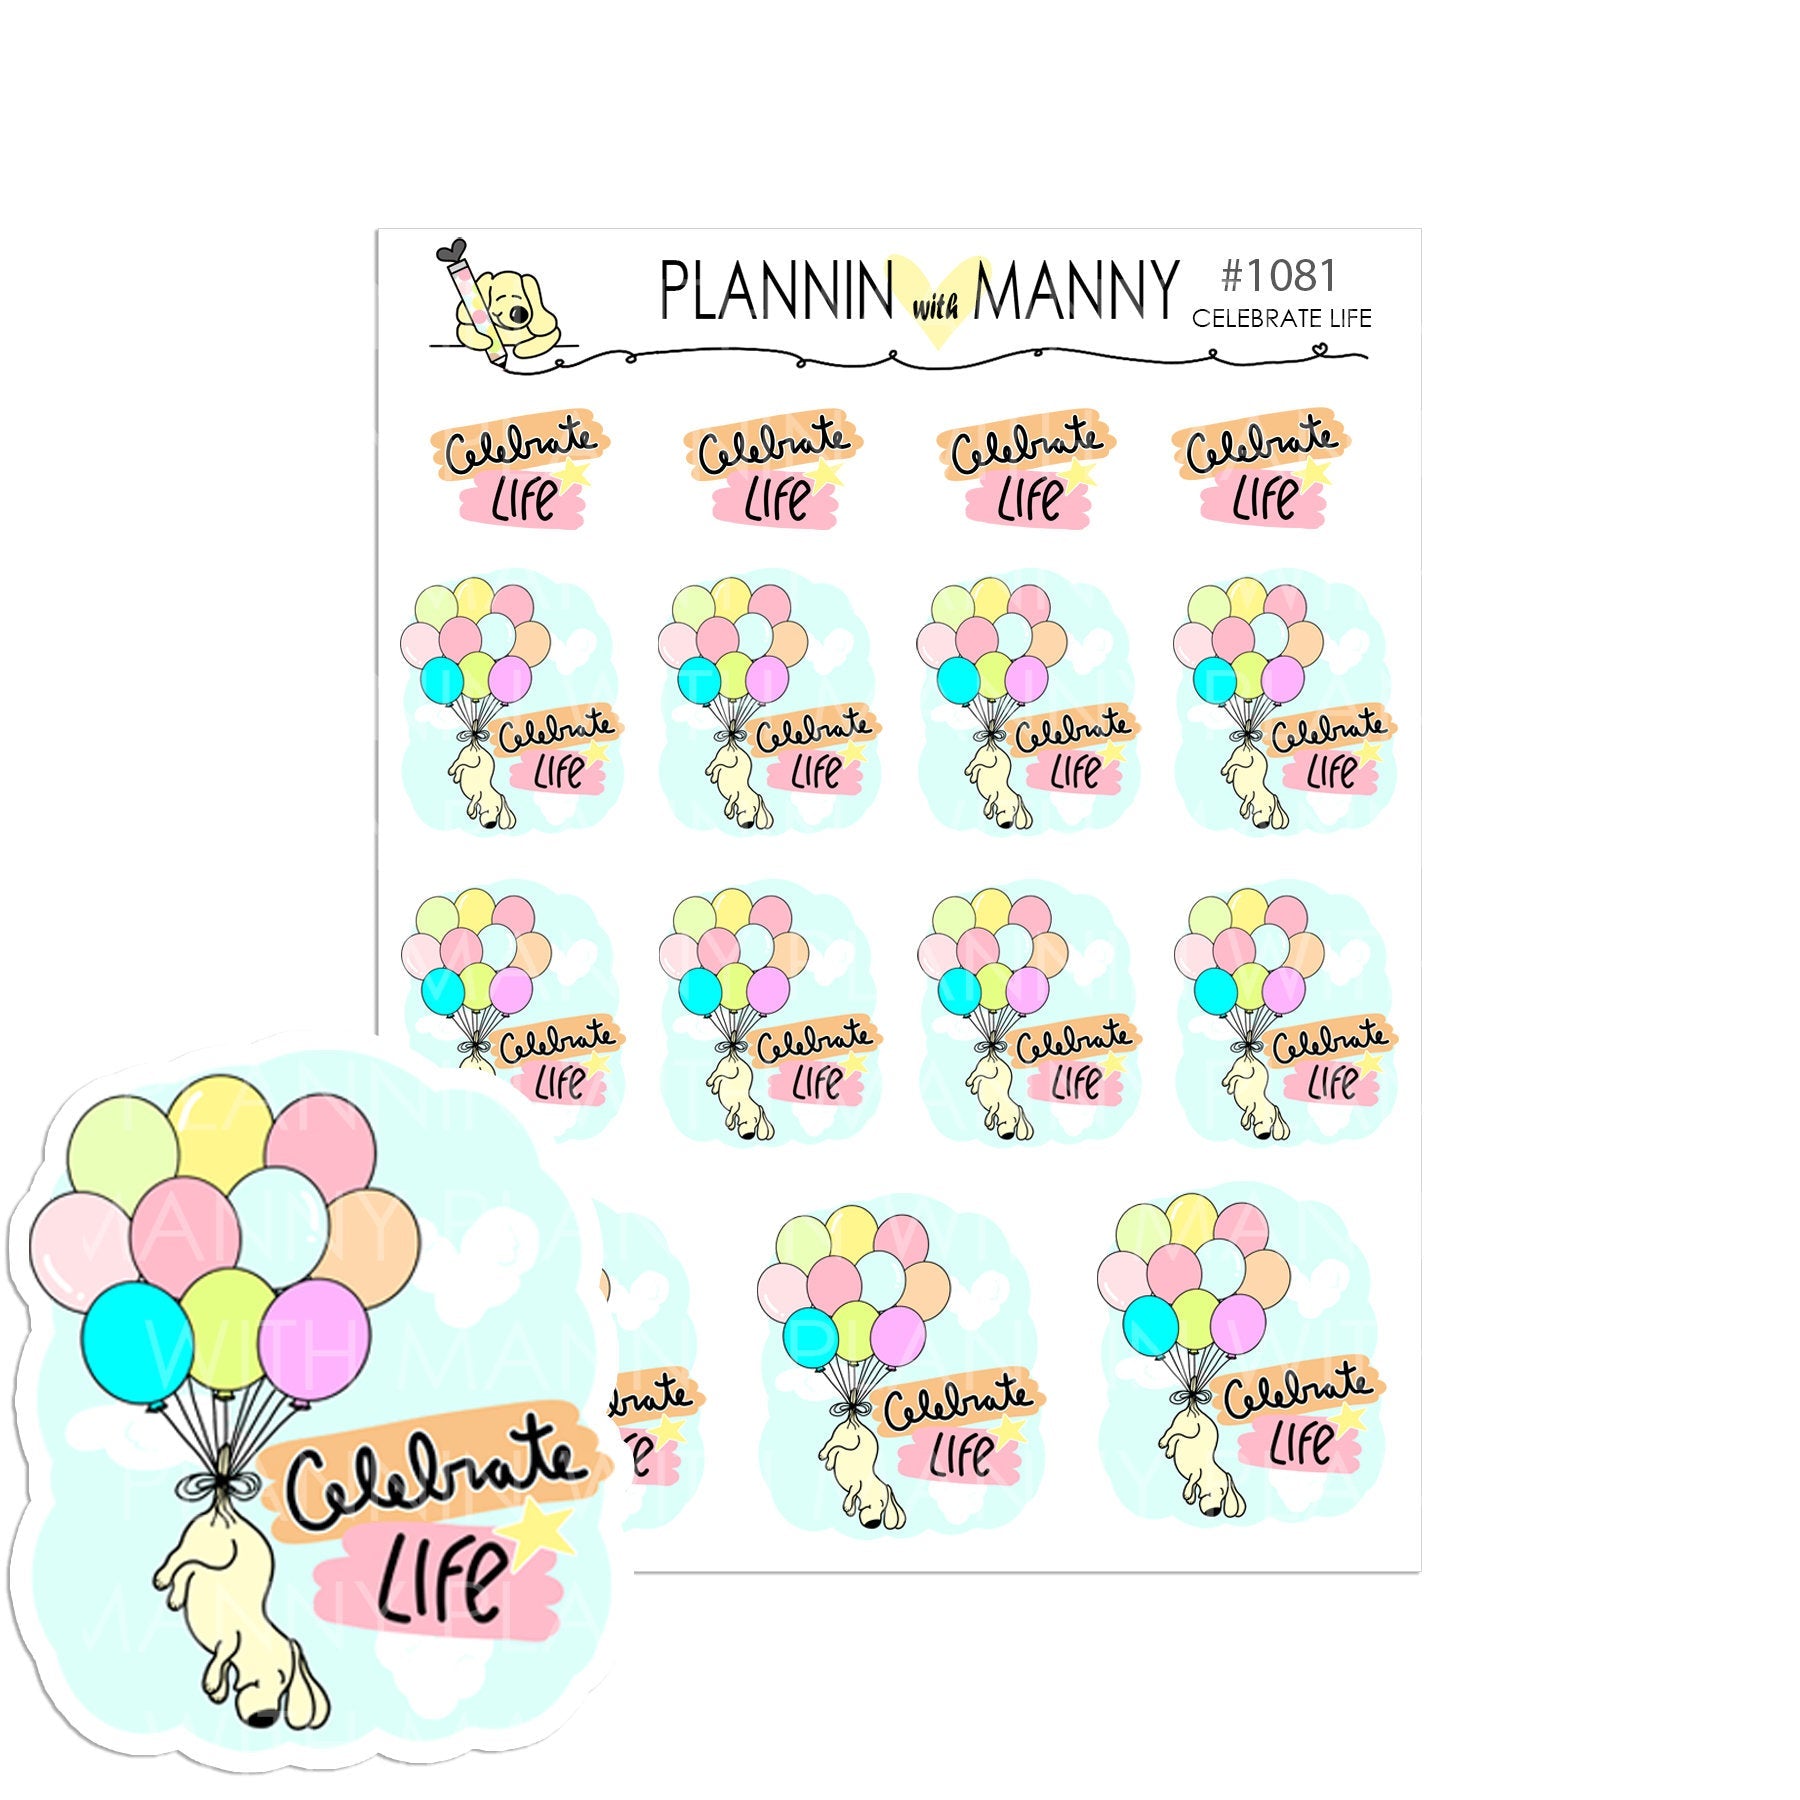 1081 CELEBRATE LIFE Planner Stickers and Diecut